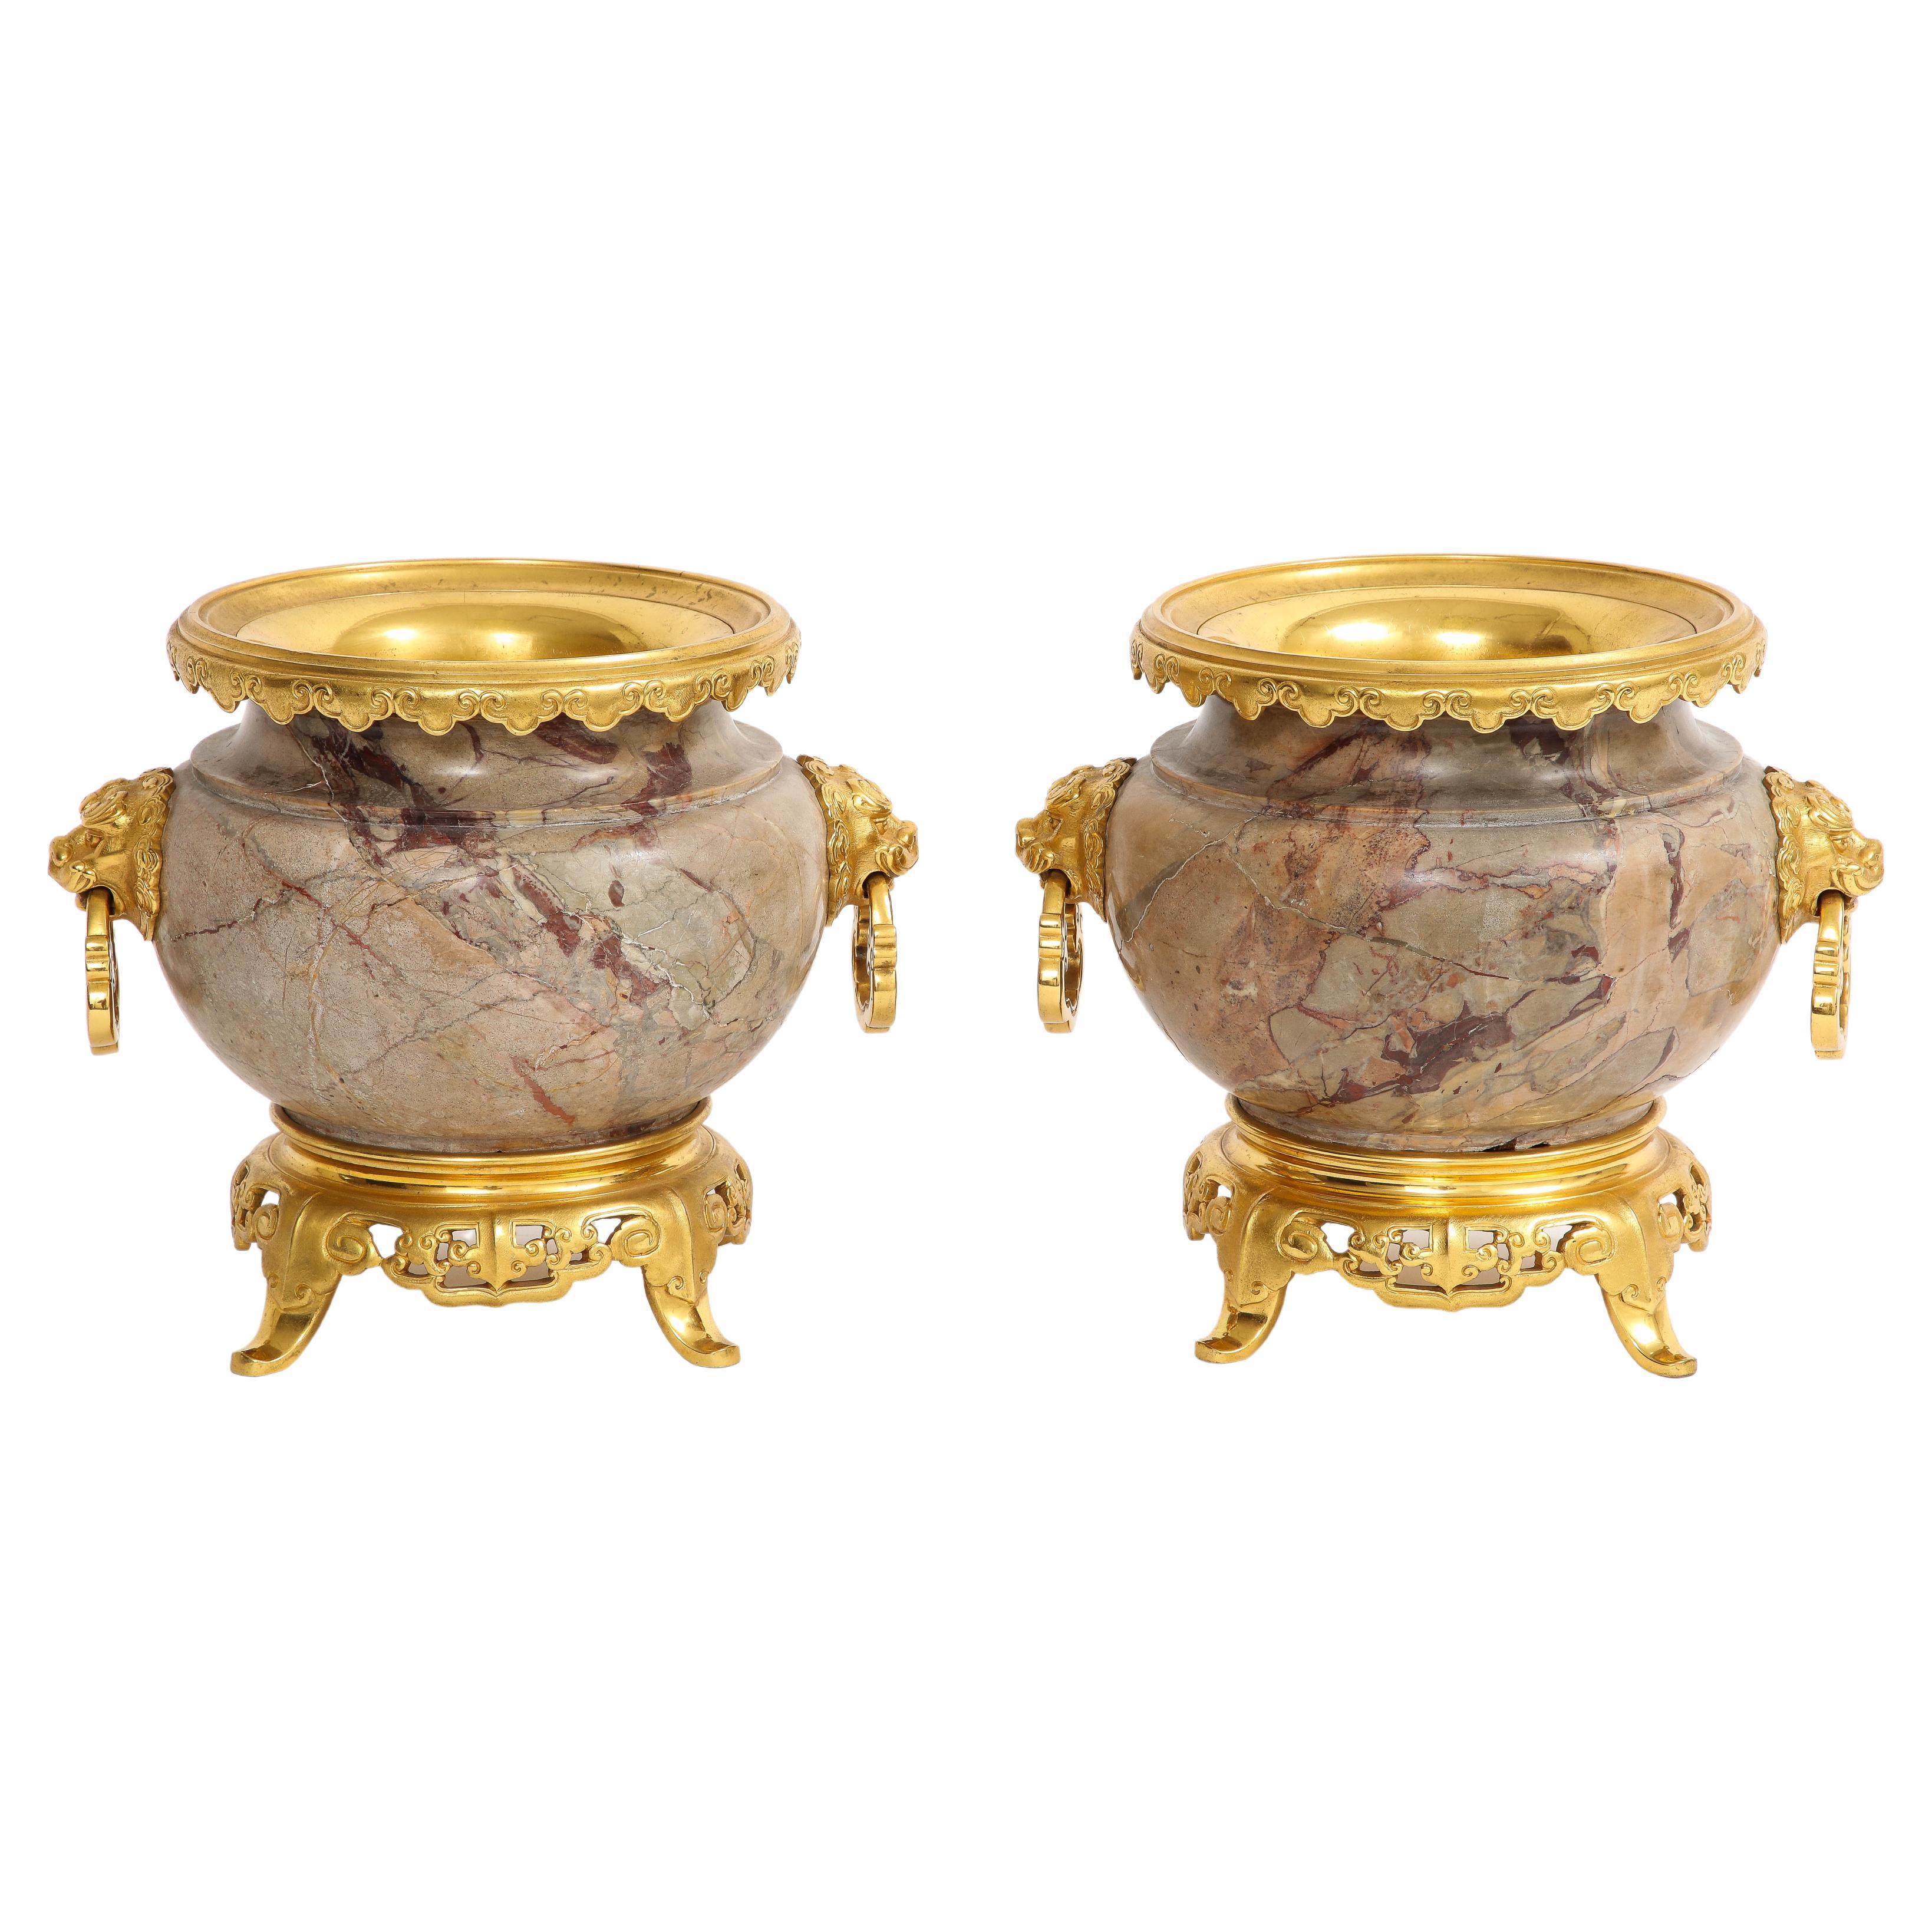 Pair of 19th Century French Ormolu Mounted Marble Centerpieces, H. Journet & Cie For Sale